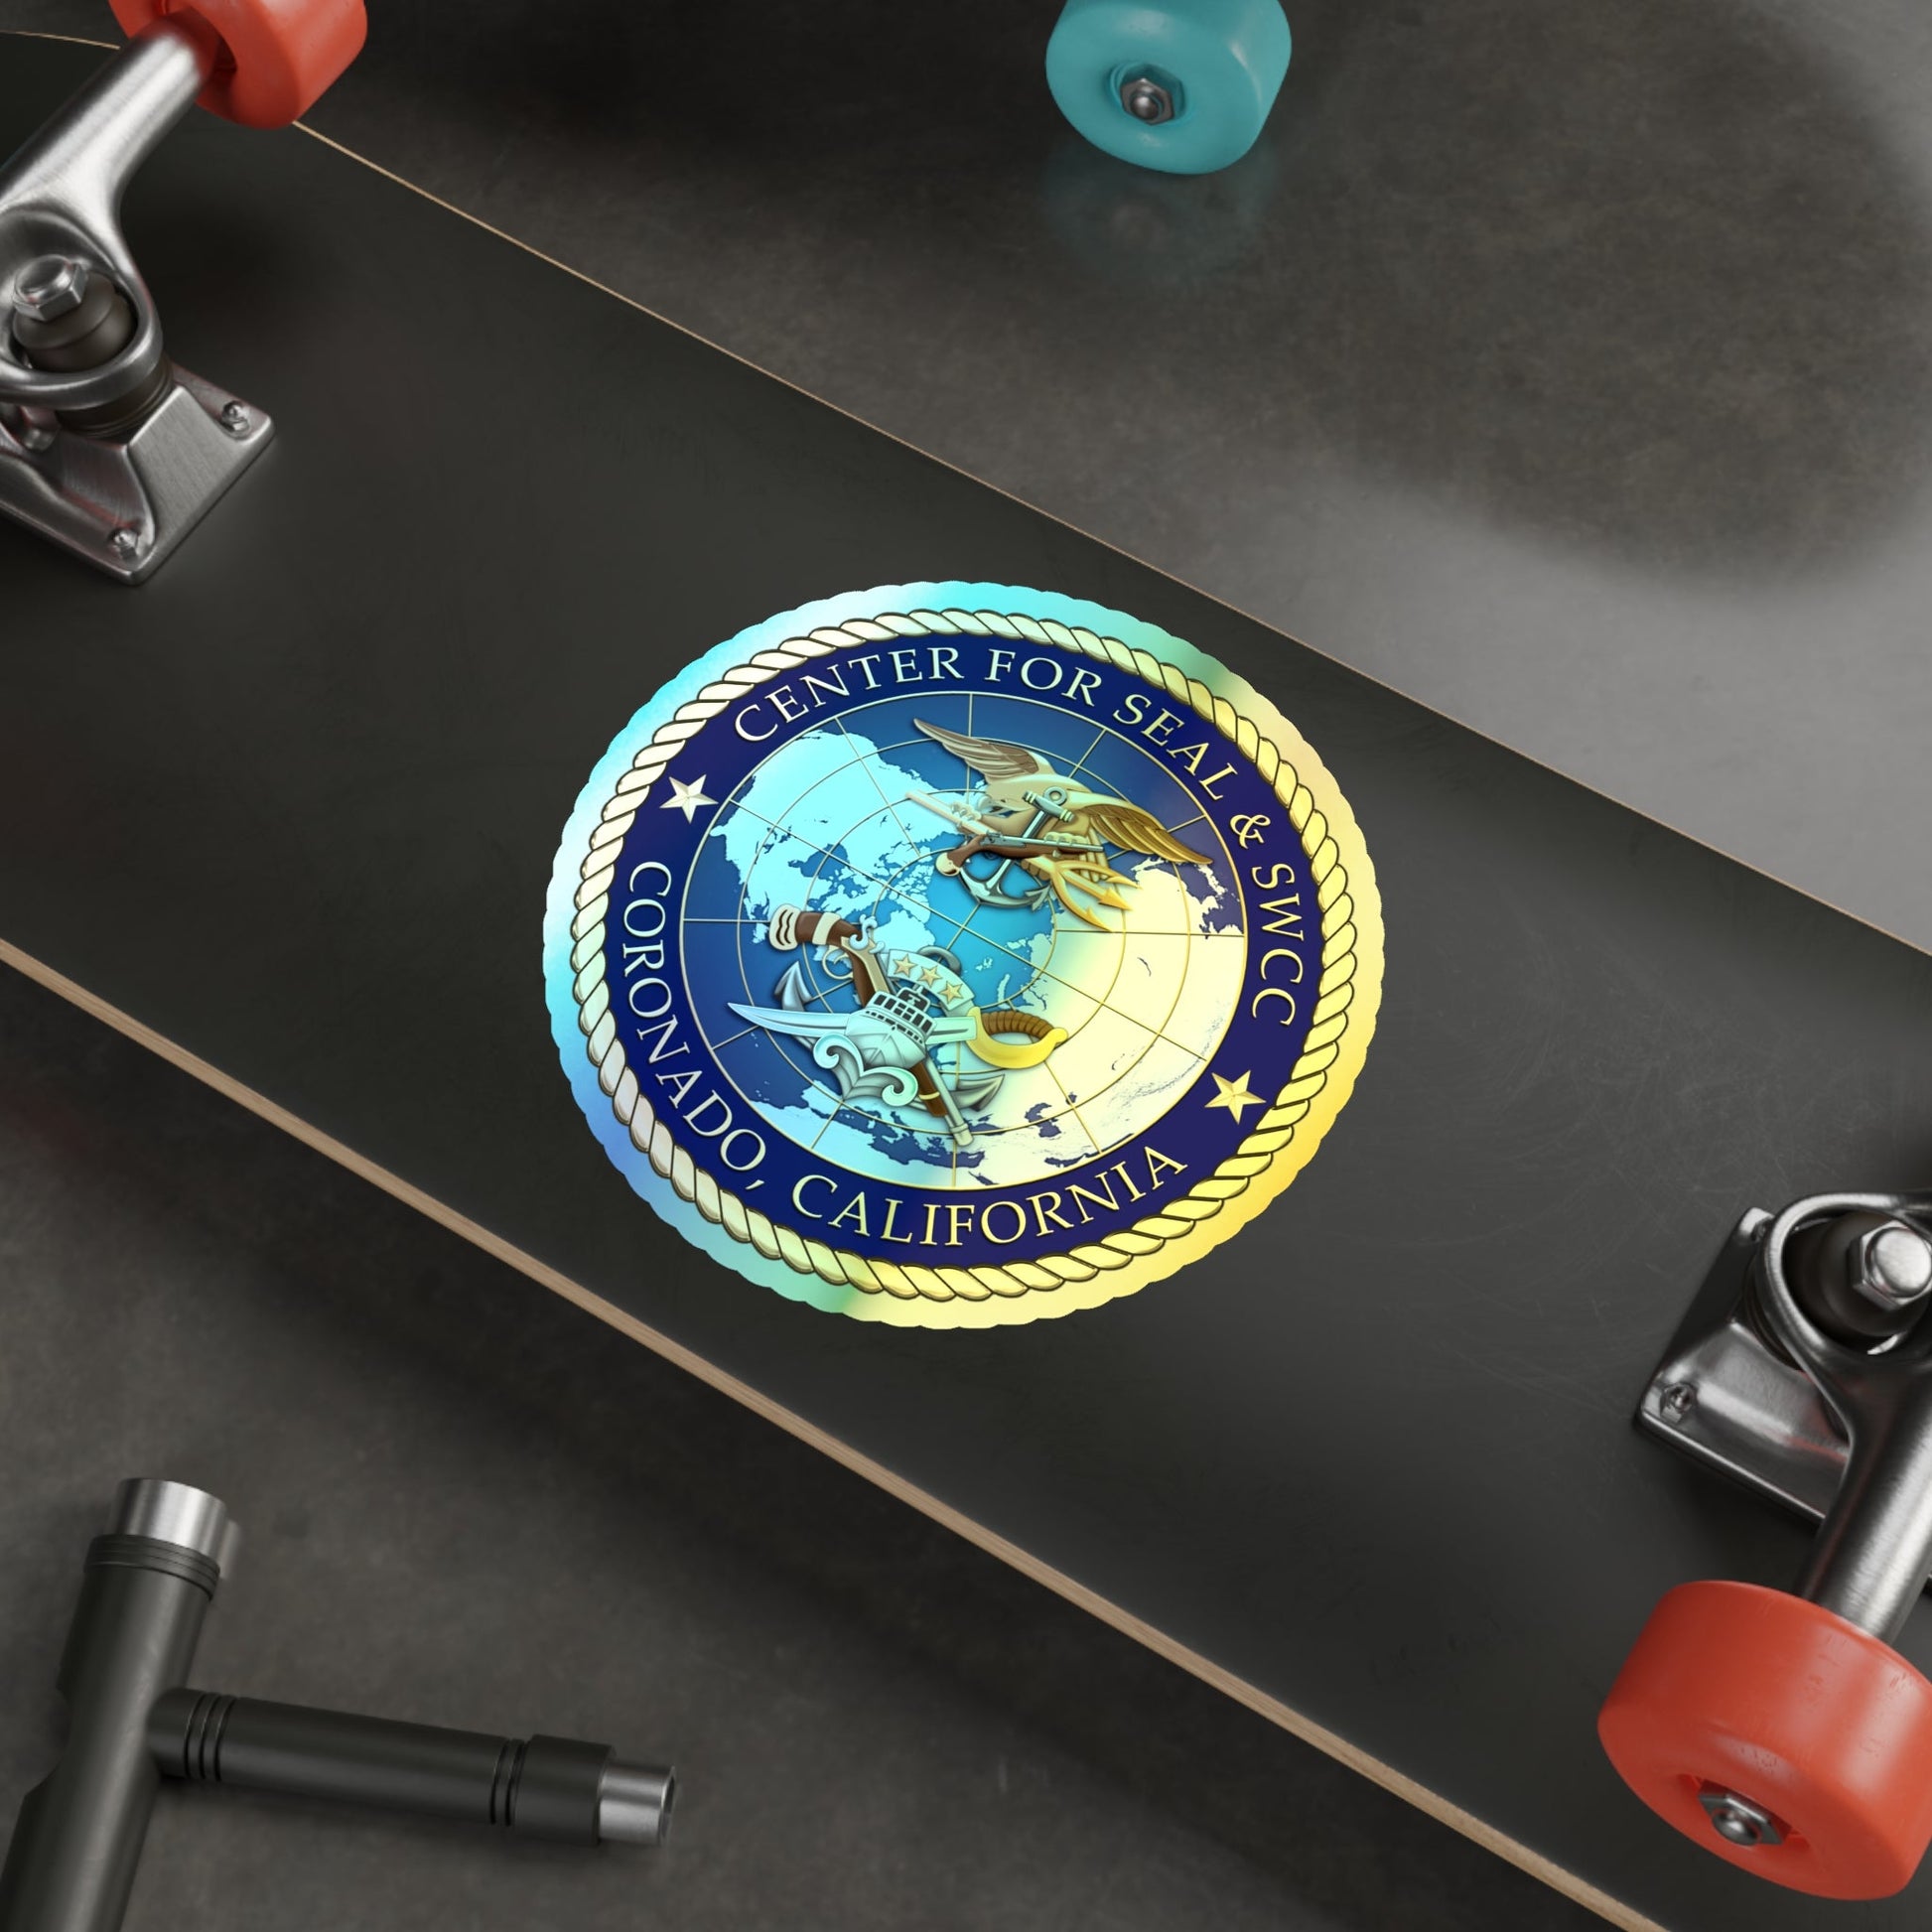 Center for SEAL and SWCC (U.S. Navy) Holographic STICKER Die-Cut Vinyl Decal-The Sticker Space